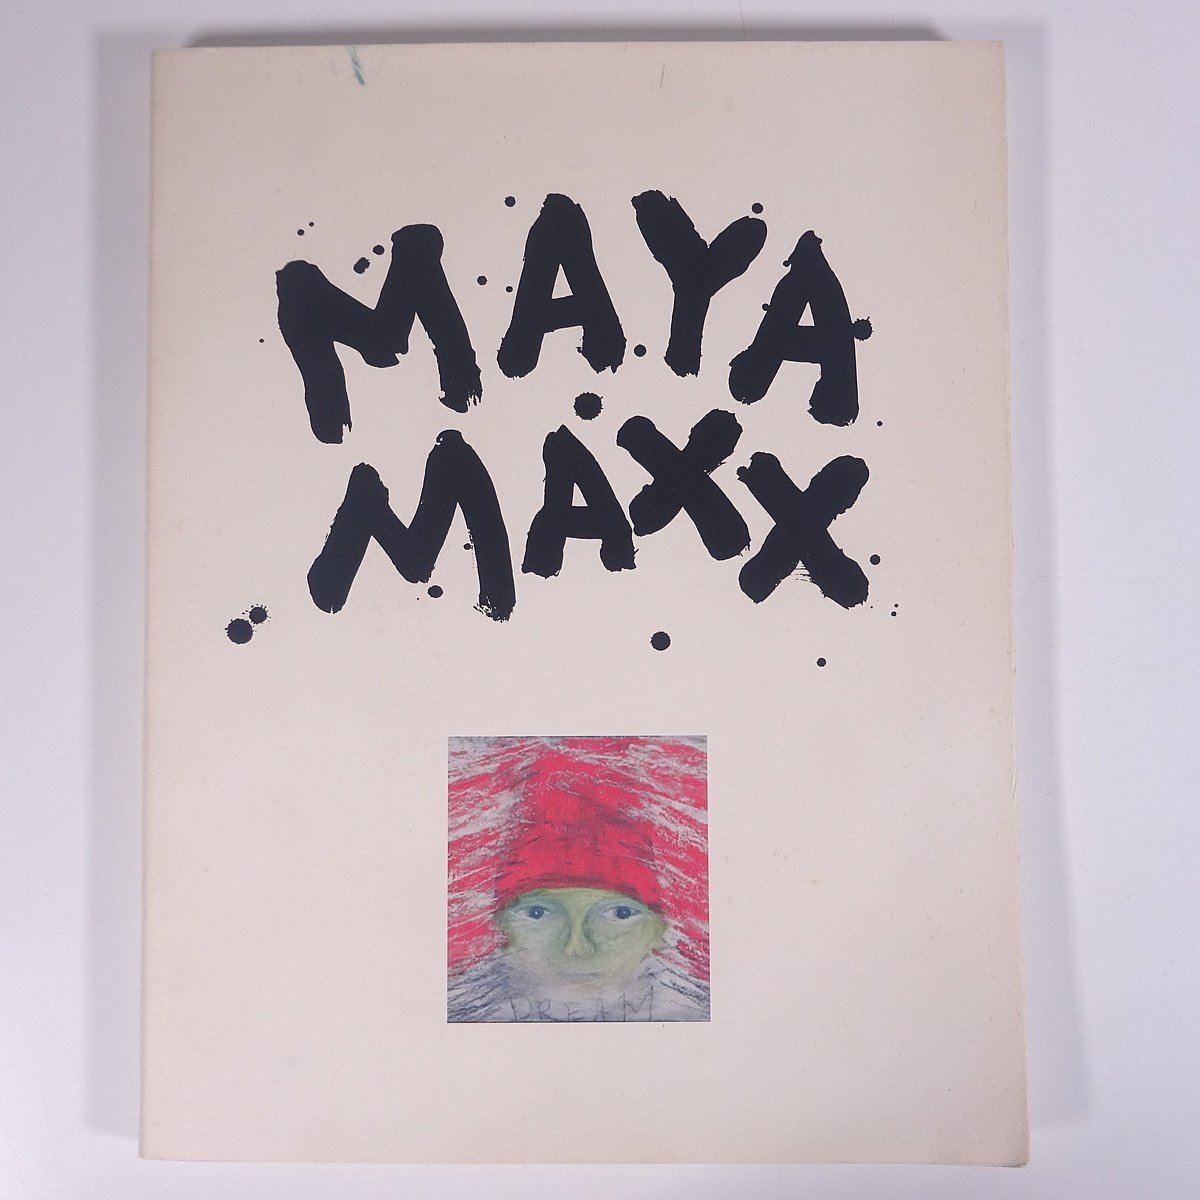 [Signed by the author] MAYA MAXX Ⅵ Carving a Picture, Kahitsukan, Kyoto Museum of Contemporary Art, 2013, large book, illustrations, catalog, art, fine art, painting, art book, collection of works, Painting, Art Book, Collection, Art Book